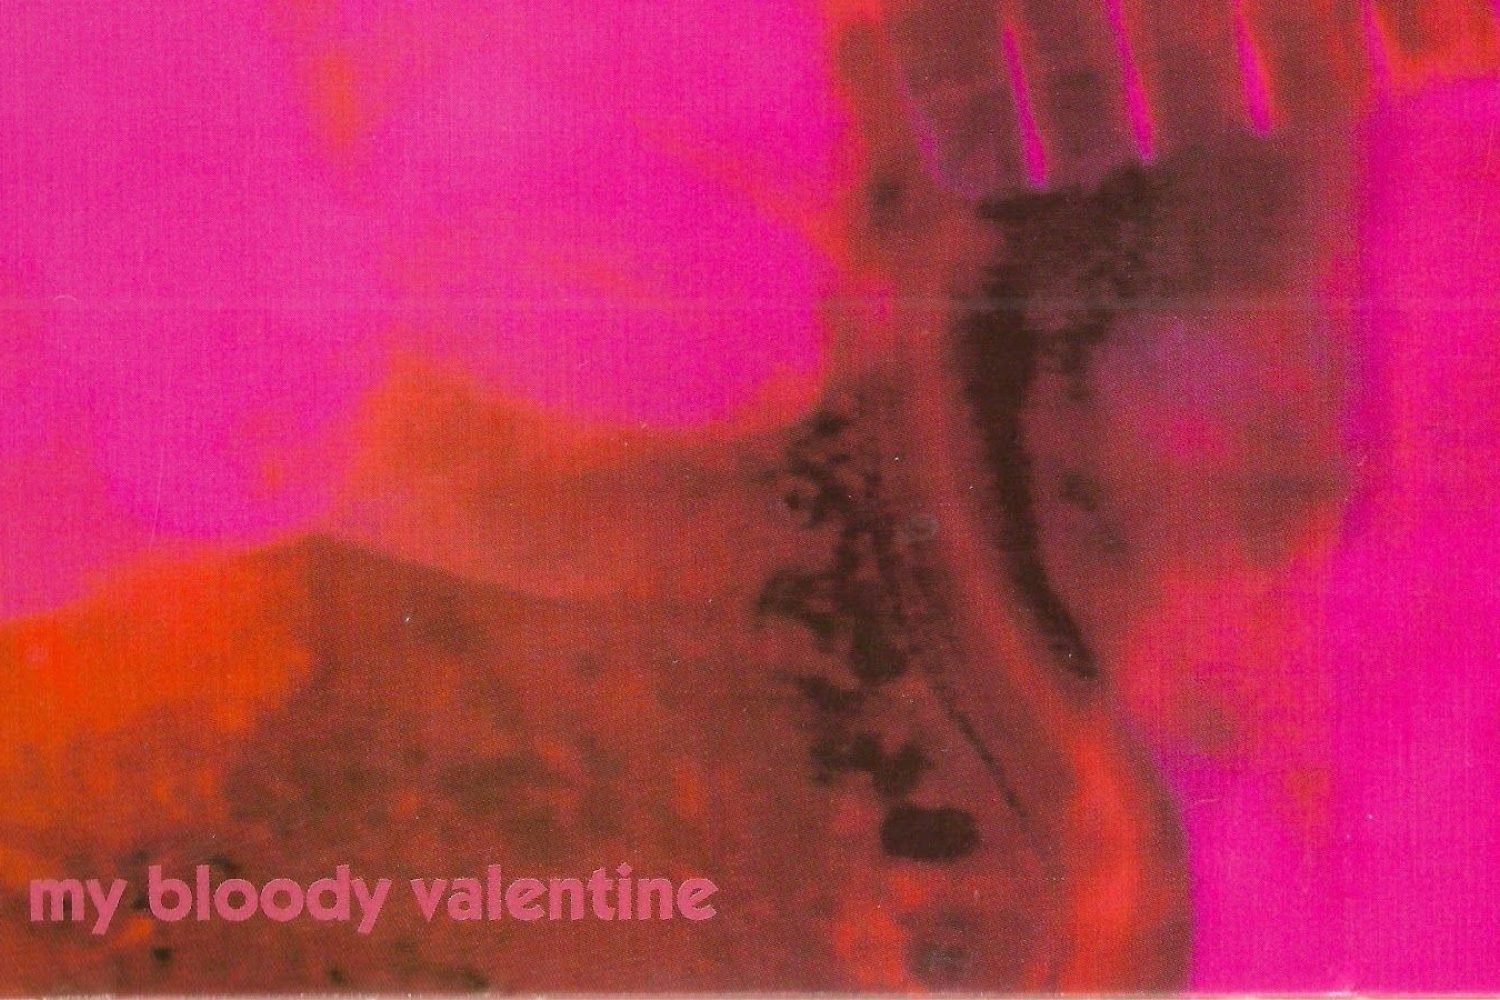 There's a new My Bloody Valentine album out next year